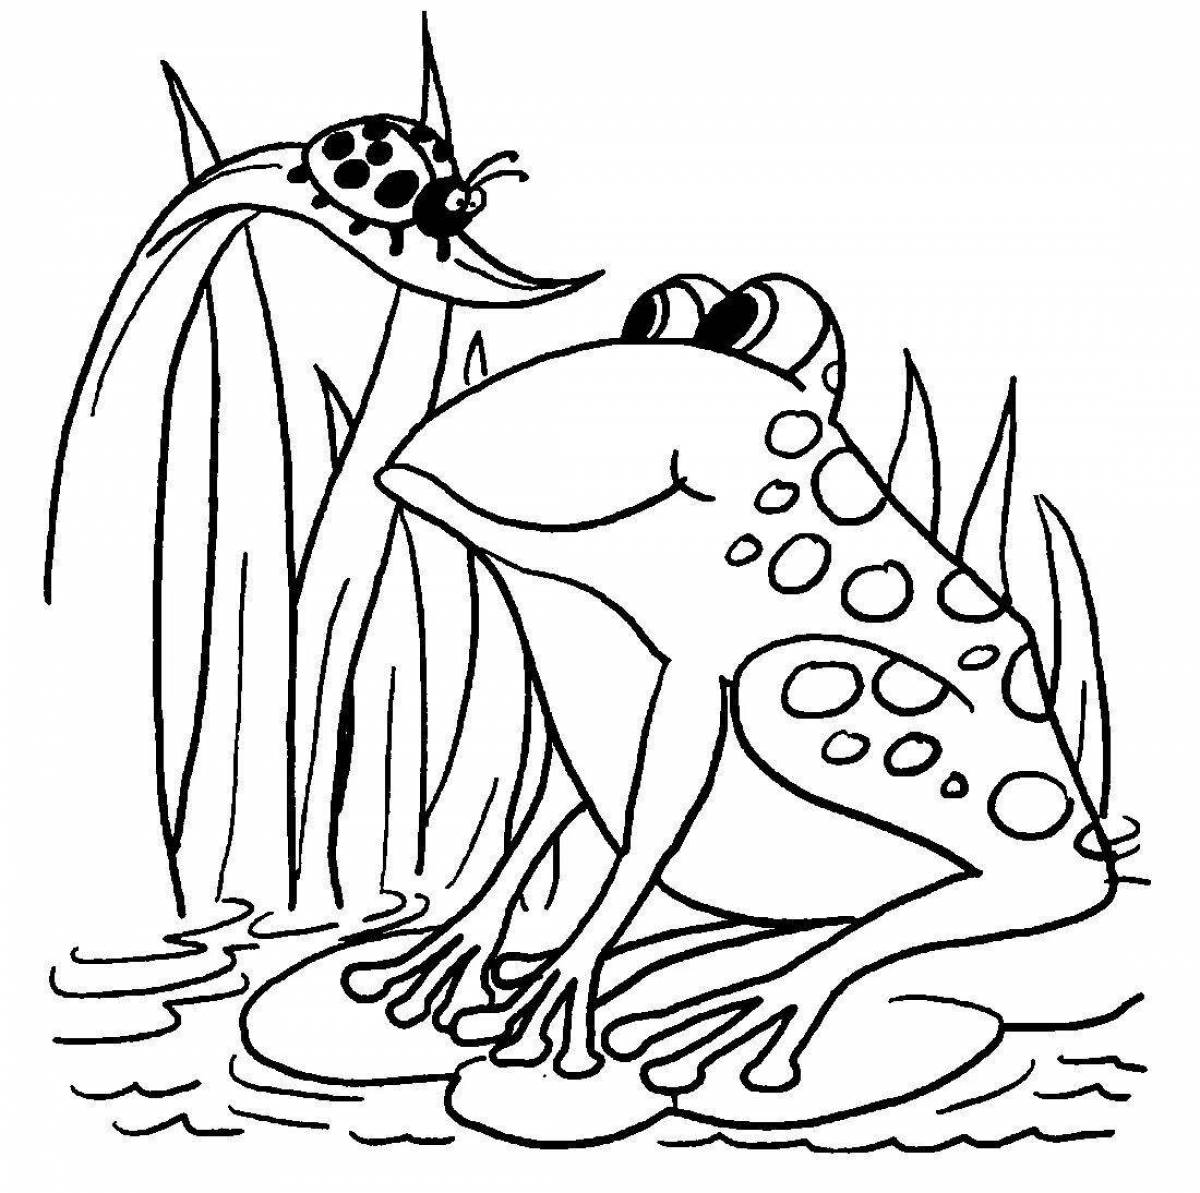 Animated fly agaric frog coloring page